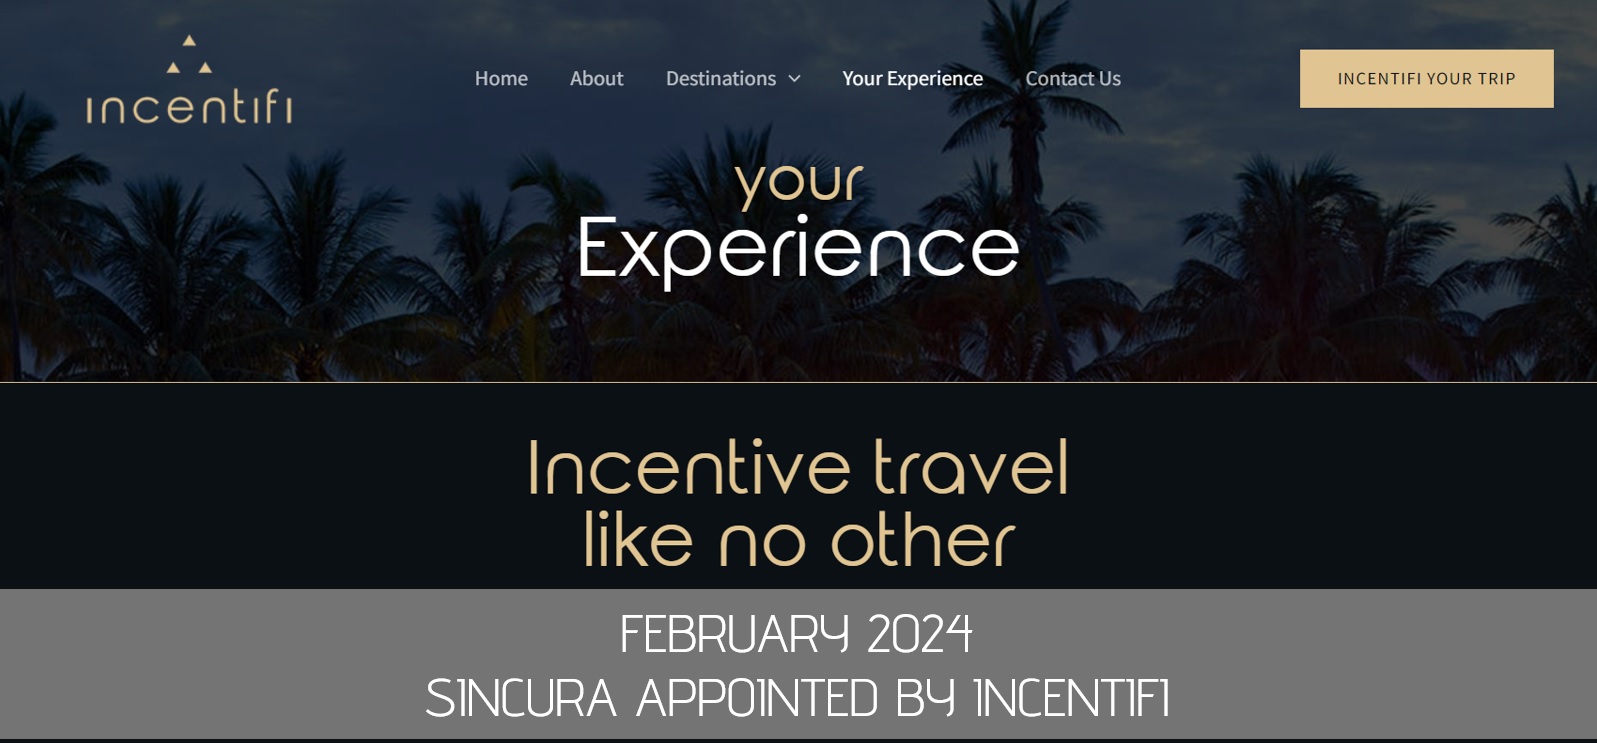 latest sincura company news: sincura appointed by incentifi to run vip programme for incentive travel